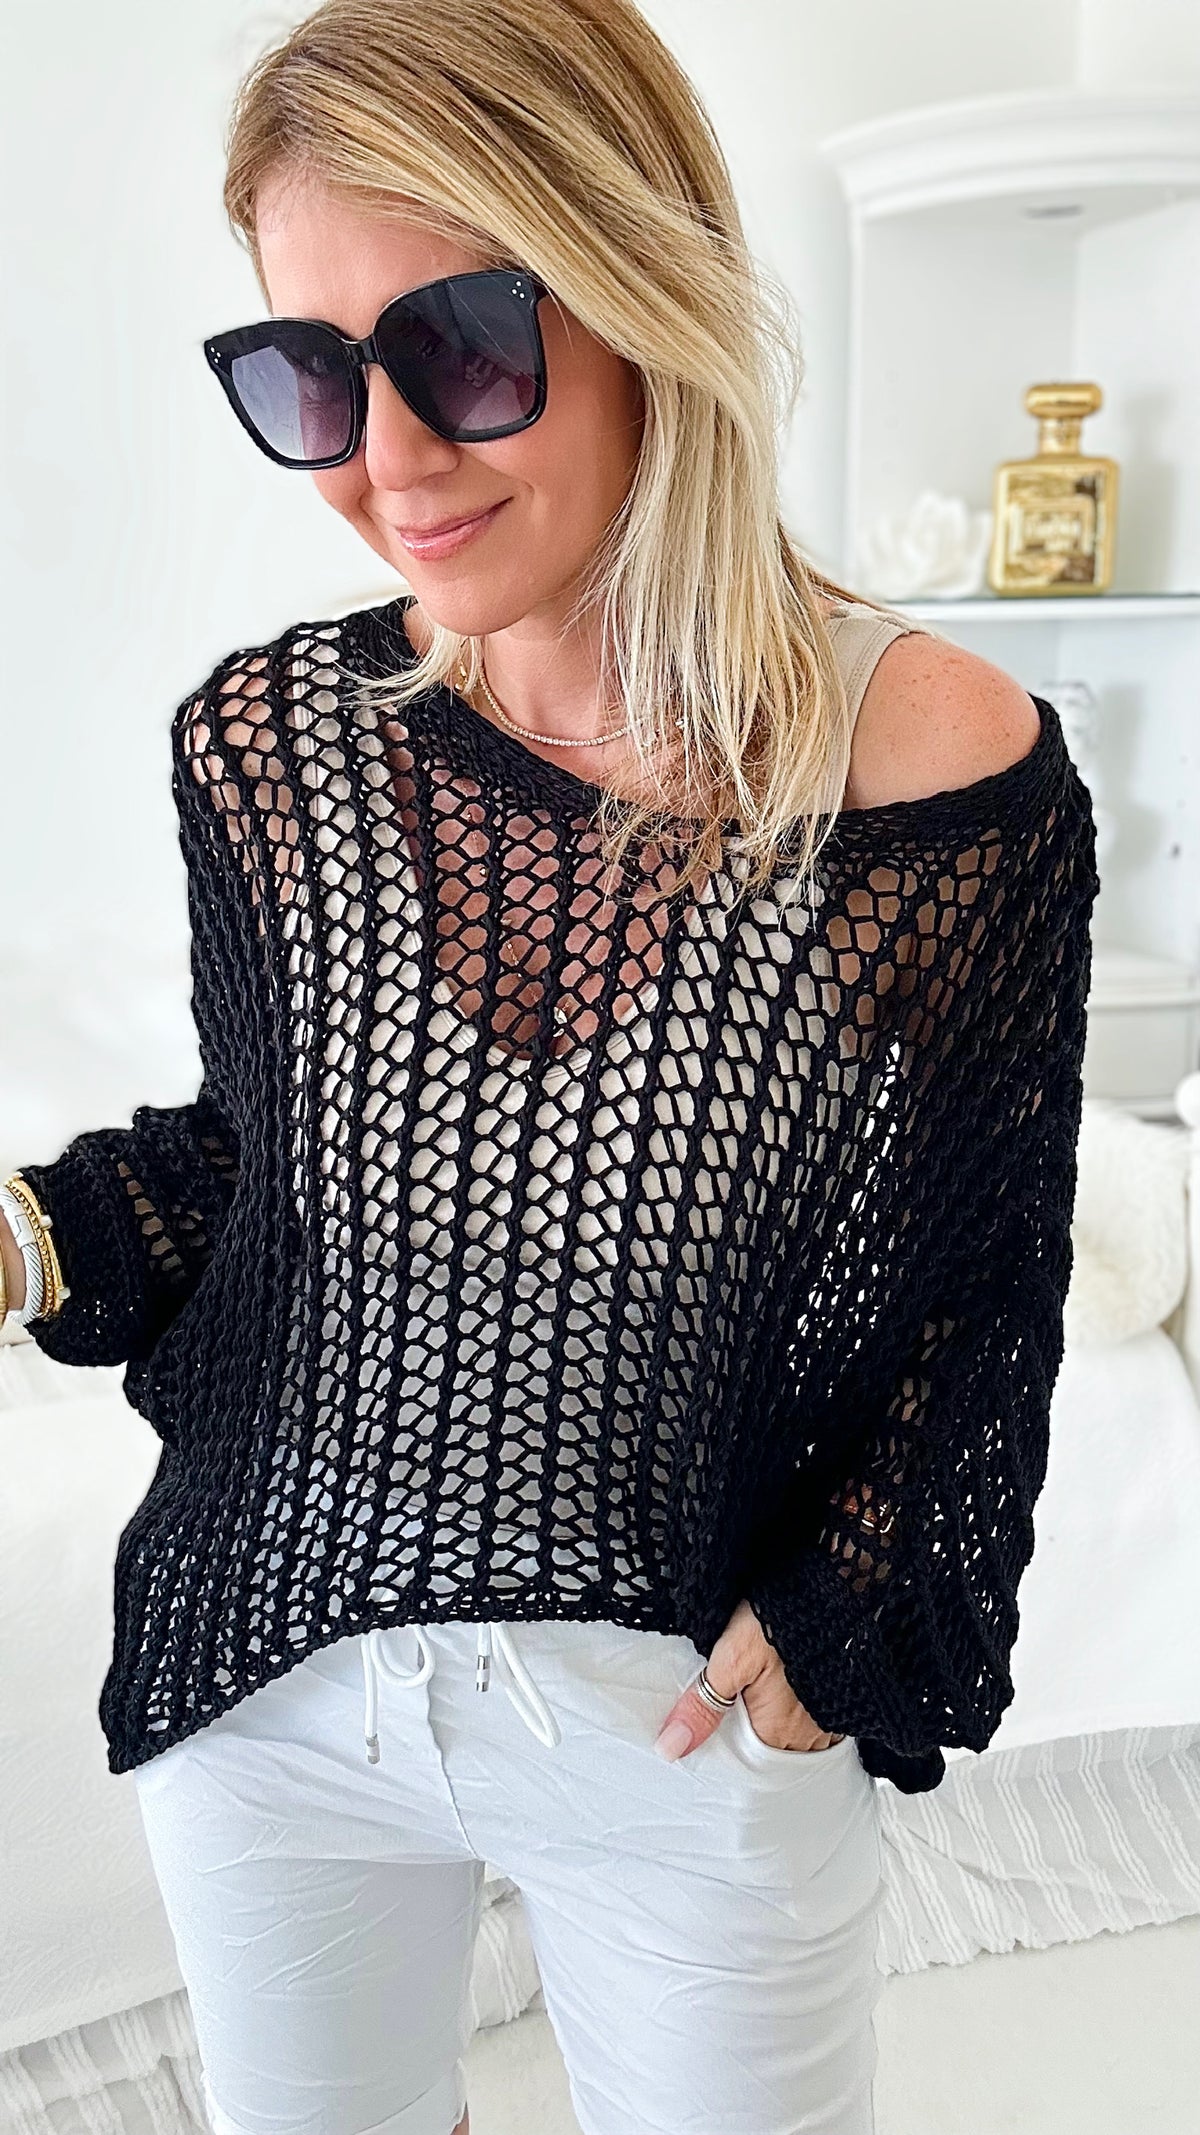 Crochet Chains Netted Italian Pullover - Black-140 Sweaters-Yolly-Coastal Bloom Boutique, find the trendiest versions of the popular styles and looks Located in Indialantic, FL